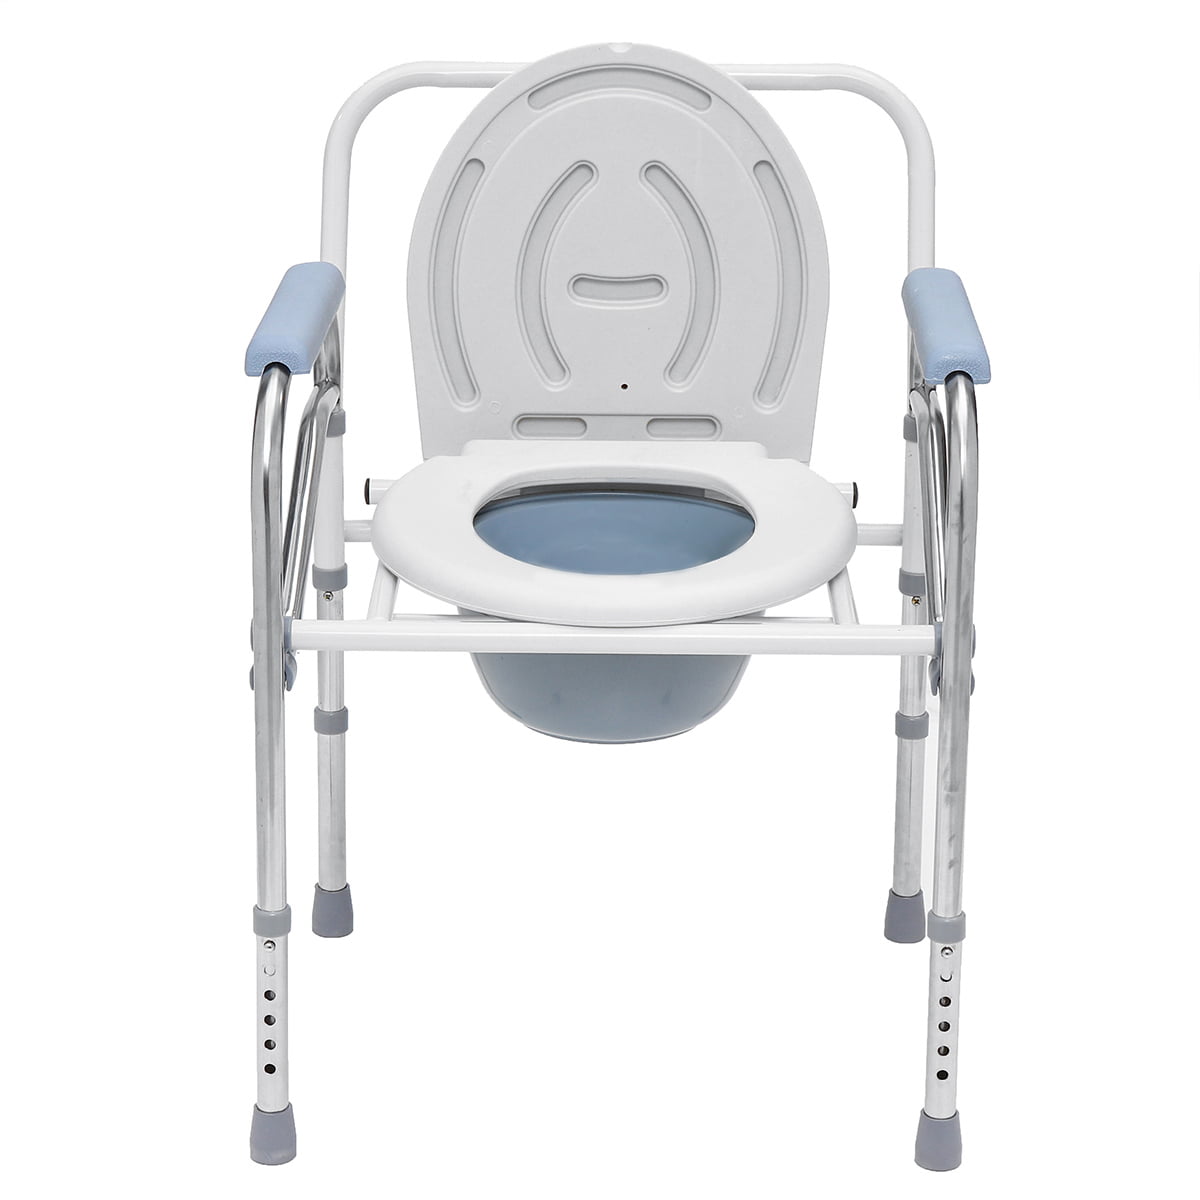 Creatice Commode Chair On Toilet for Living room